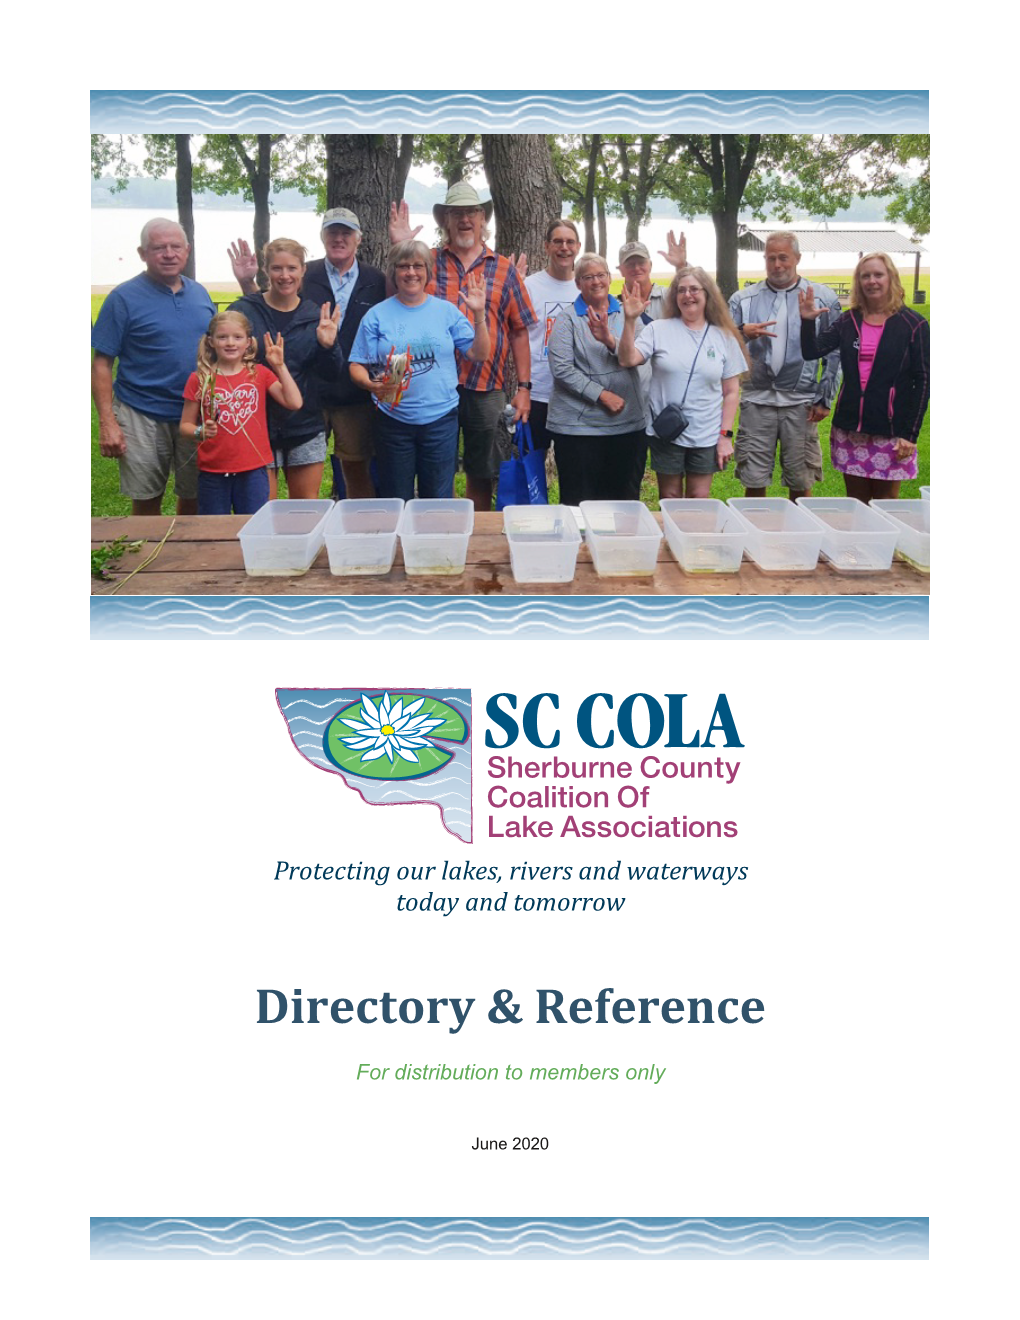 SC COLA Directory-Reference June 2020